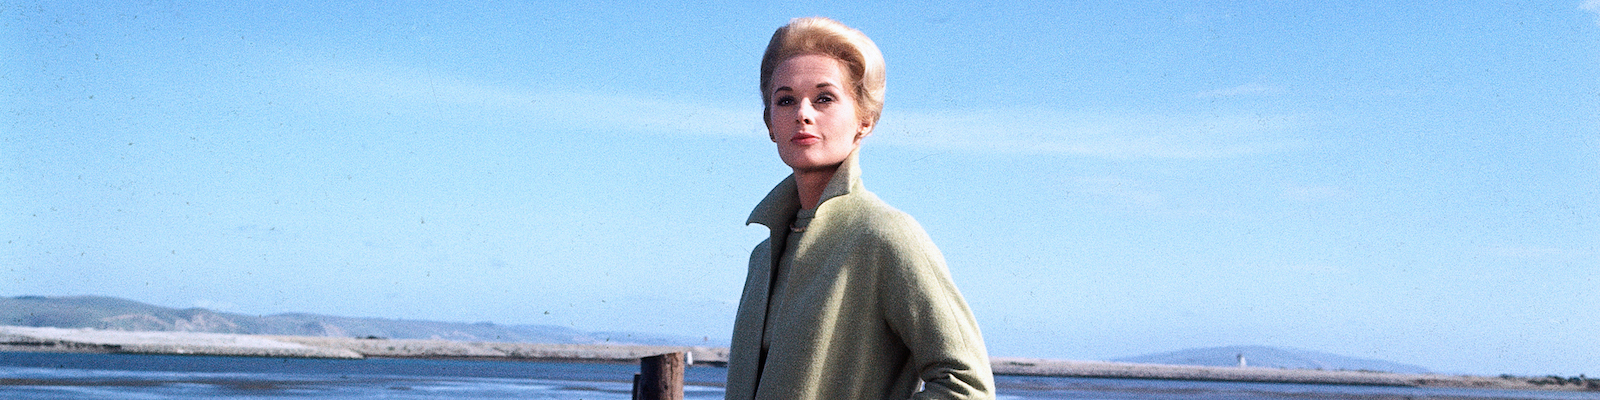 Tippi Hedren poses for a photo on a doc